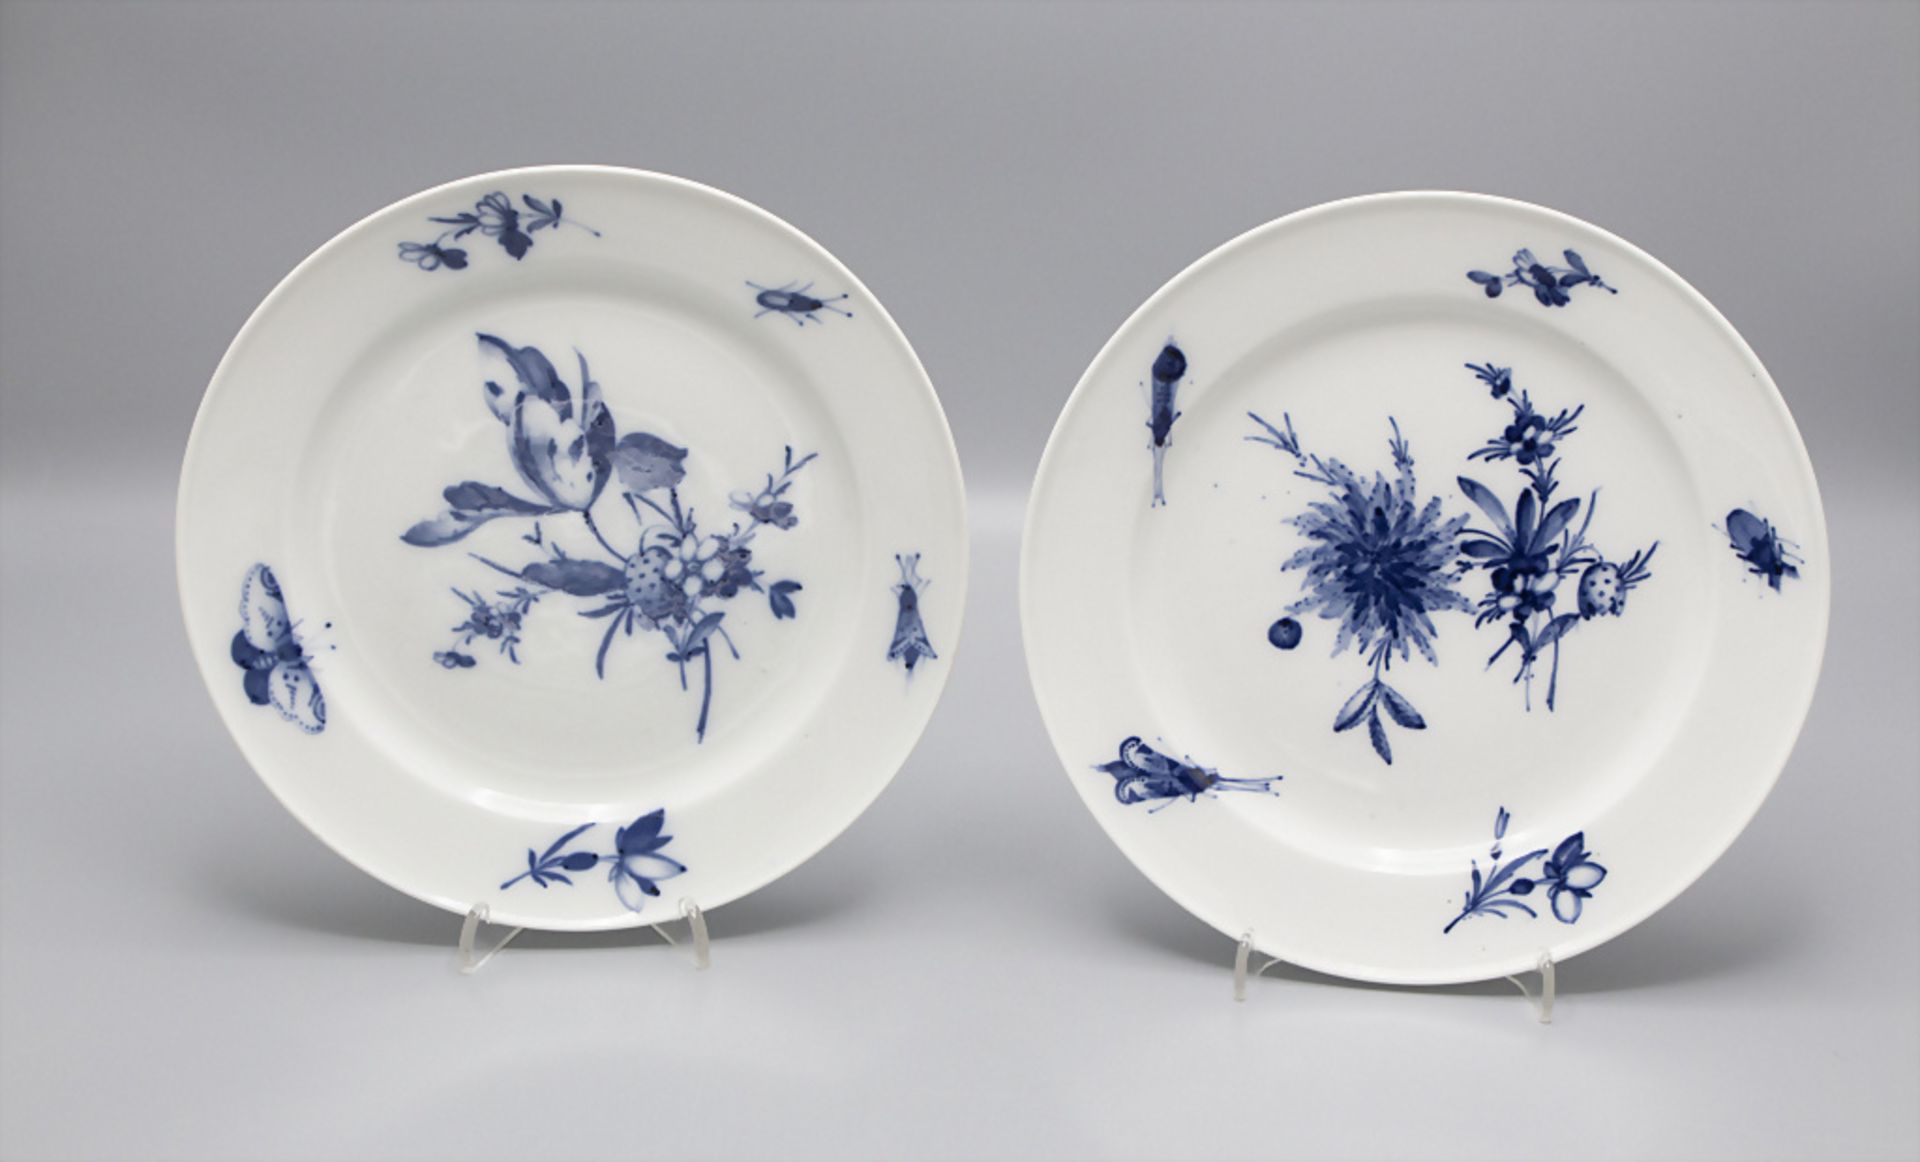 4 Teller mit Blaumalerei / 4 porcelain plates with flowers and insects, Meissen, Punktzeit ... - Image 2 of 4